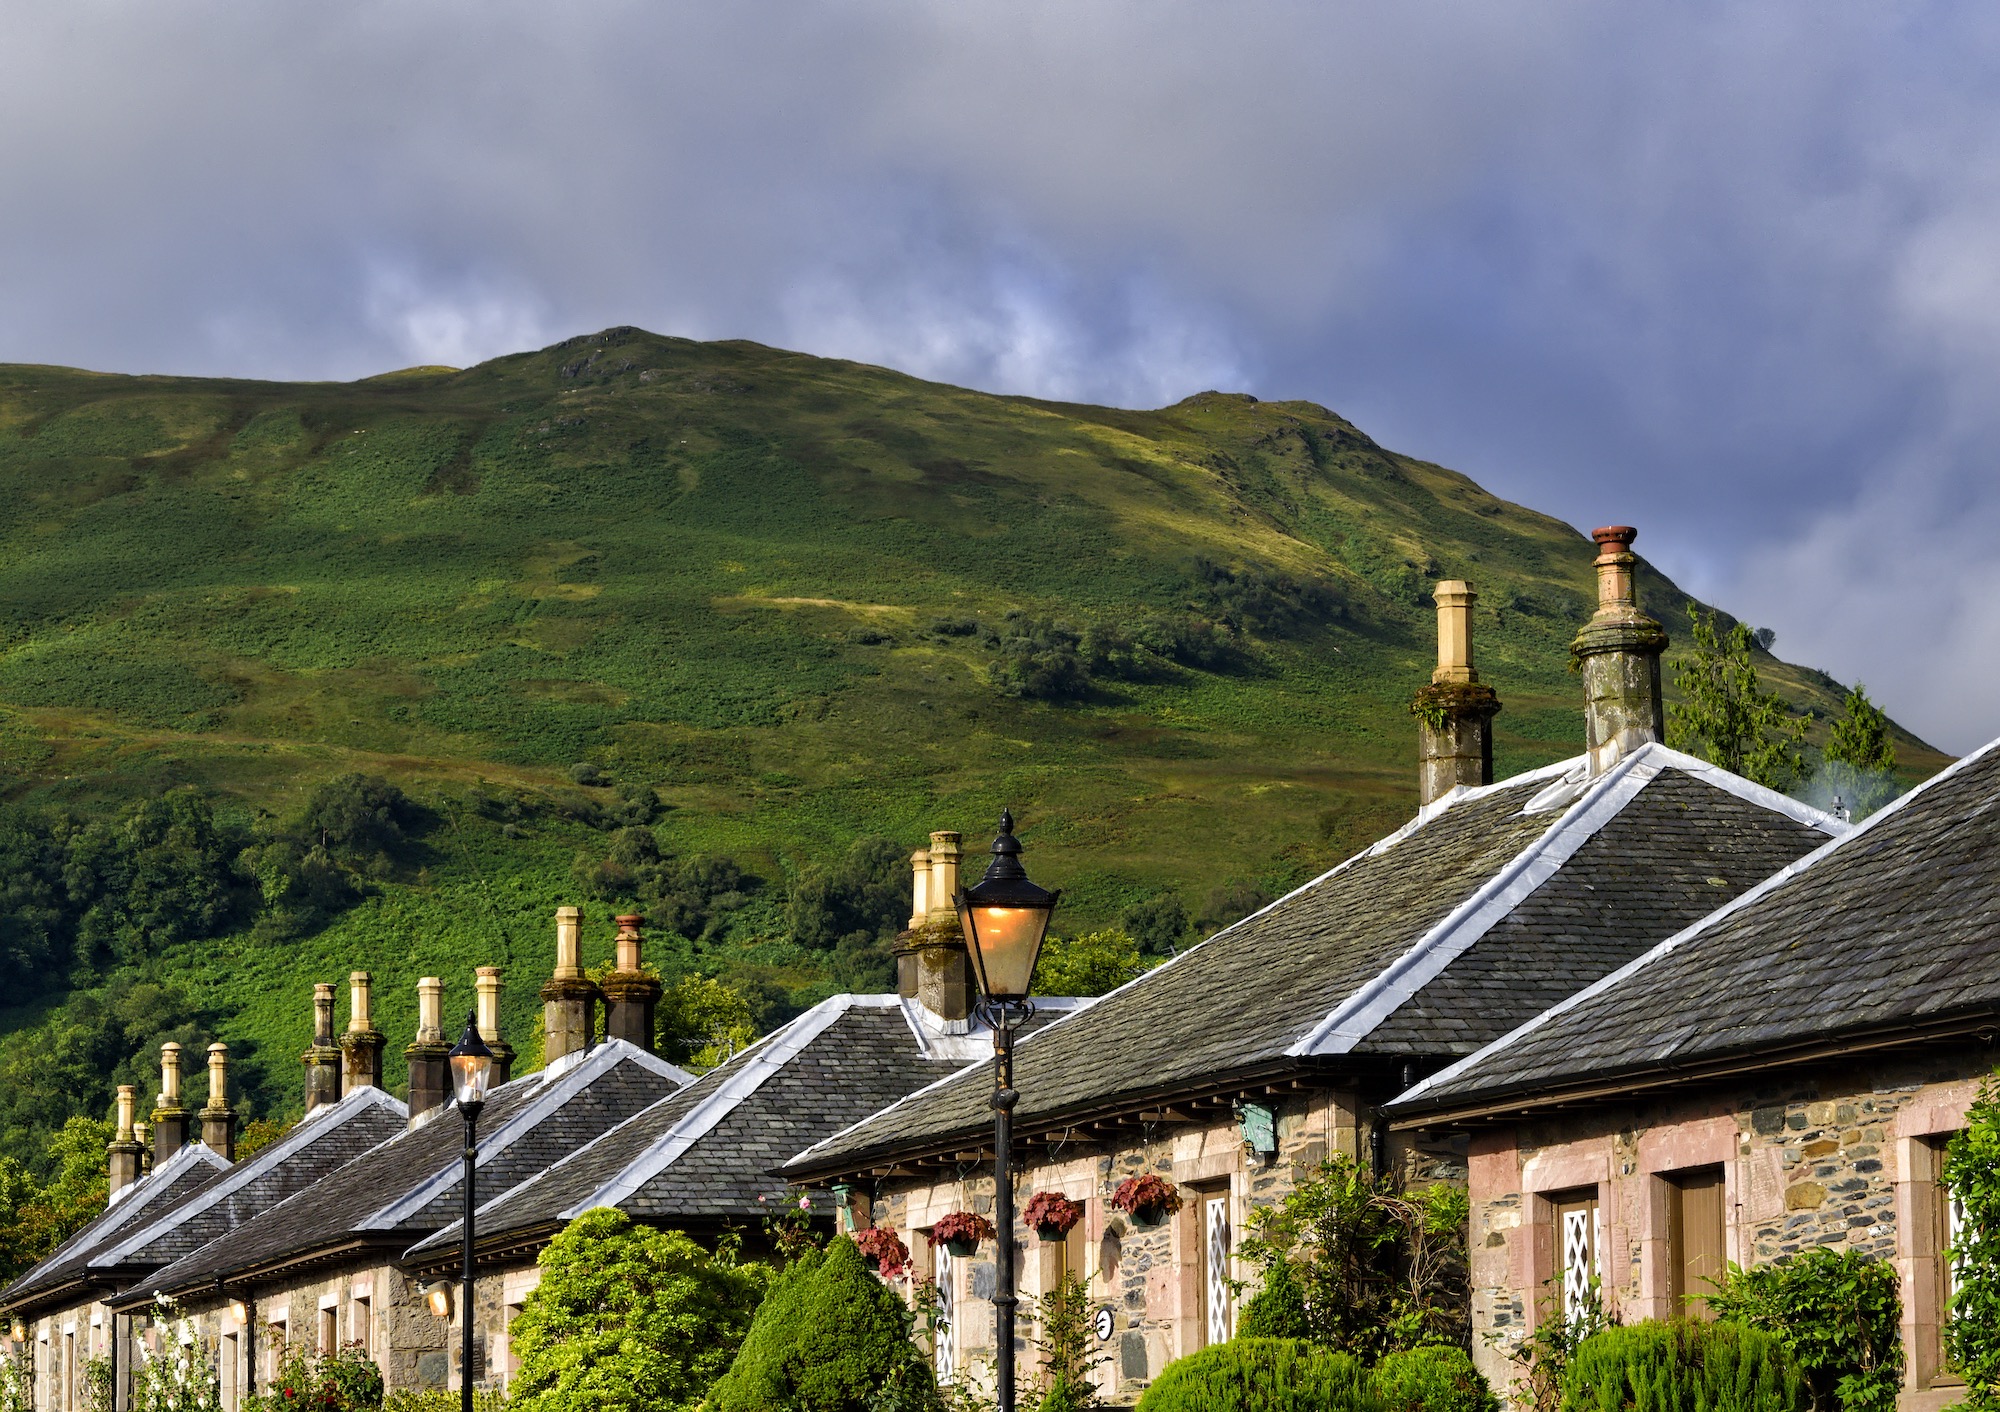 A row of houses. Behind them is a tall green hill